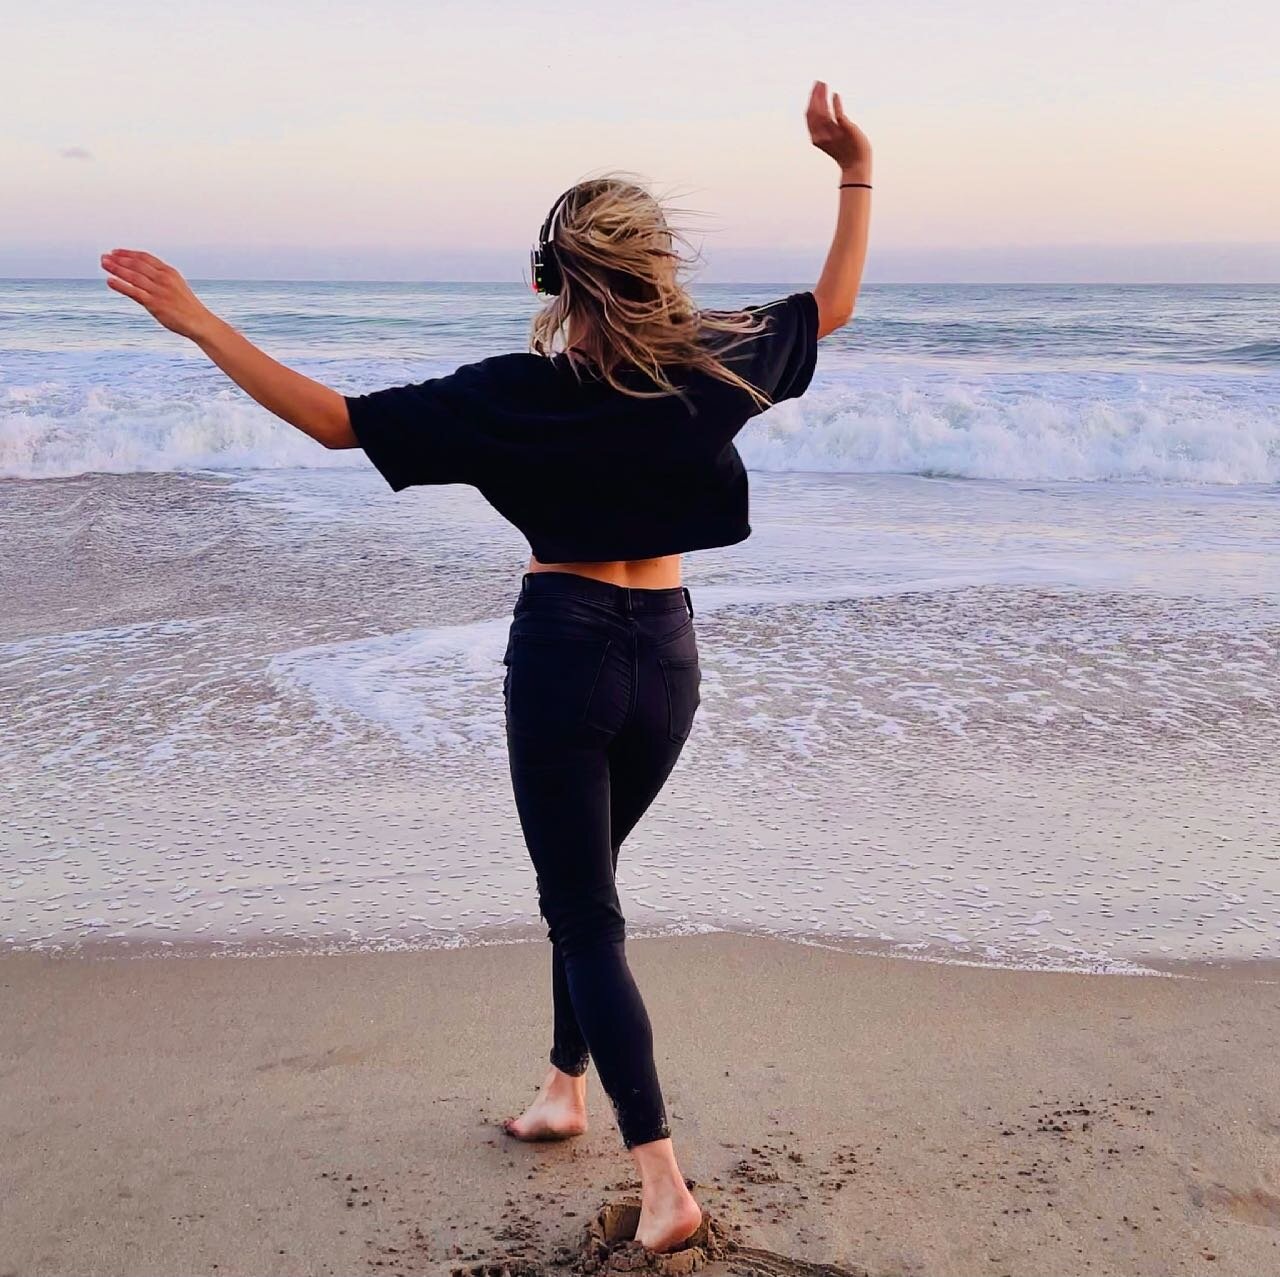 Go with the flow and where the winds blow ... &ldquo; And forget not that the earth delights to feel your bare feet and the winds long to play with your hair&rdquo; -Khalili Gibran, The Profit  #outdooryogasantacruz #santacruzyoga #santacruzdance #sa